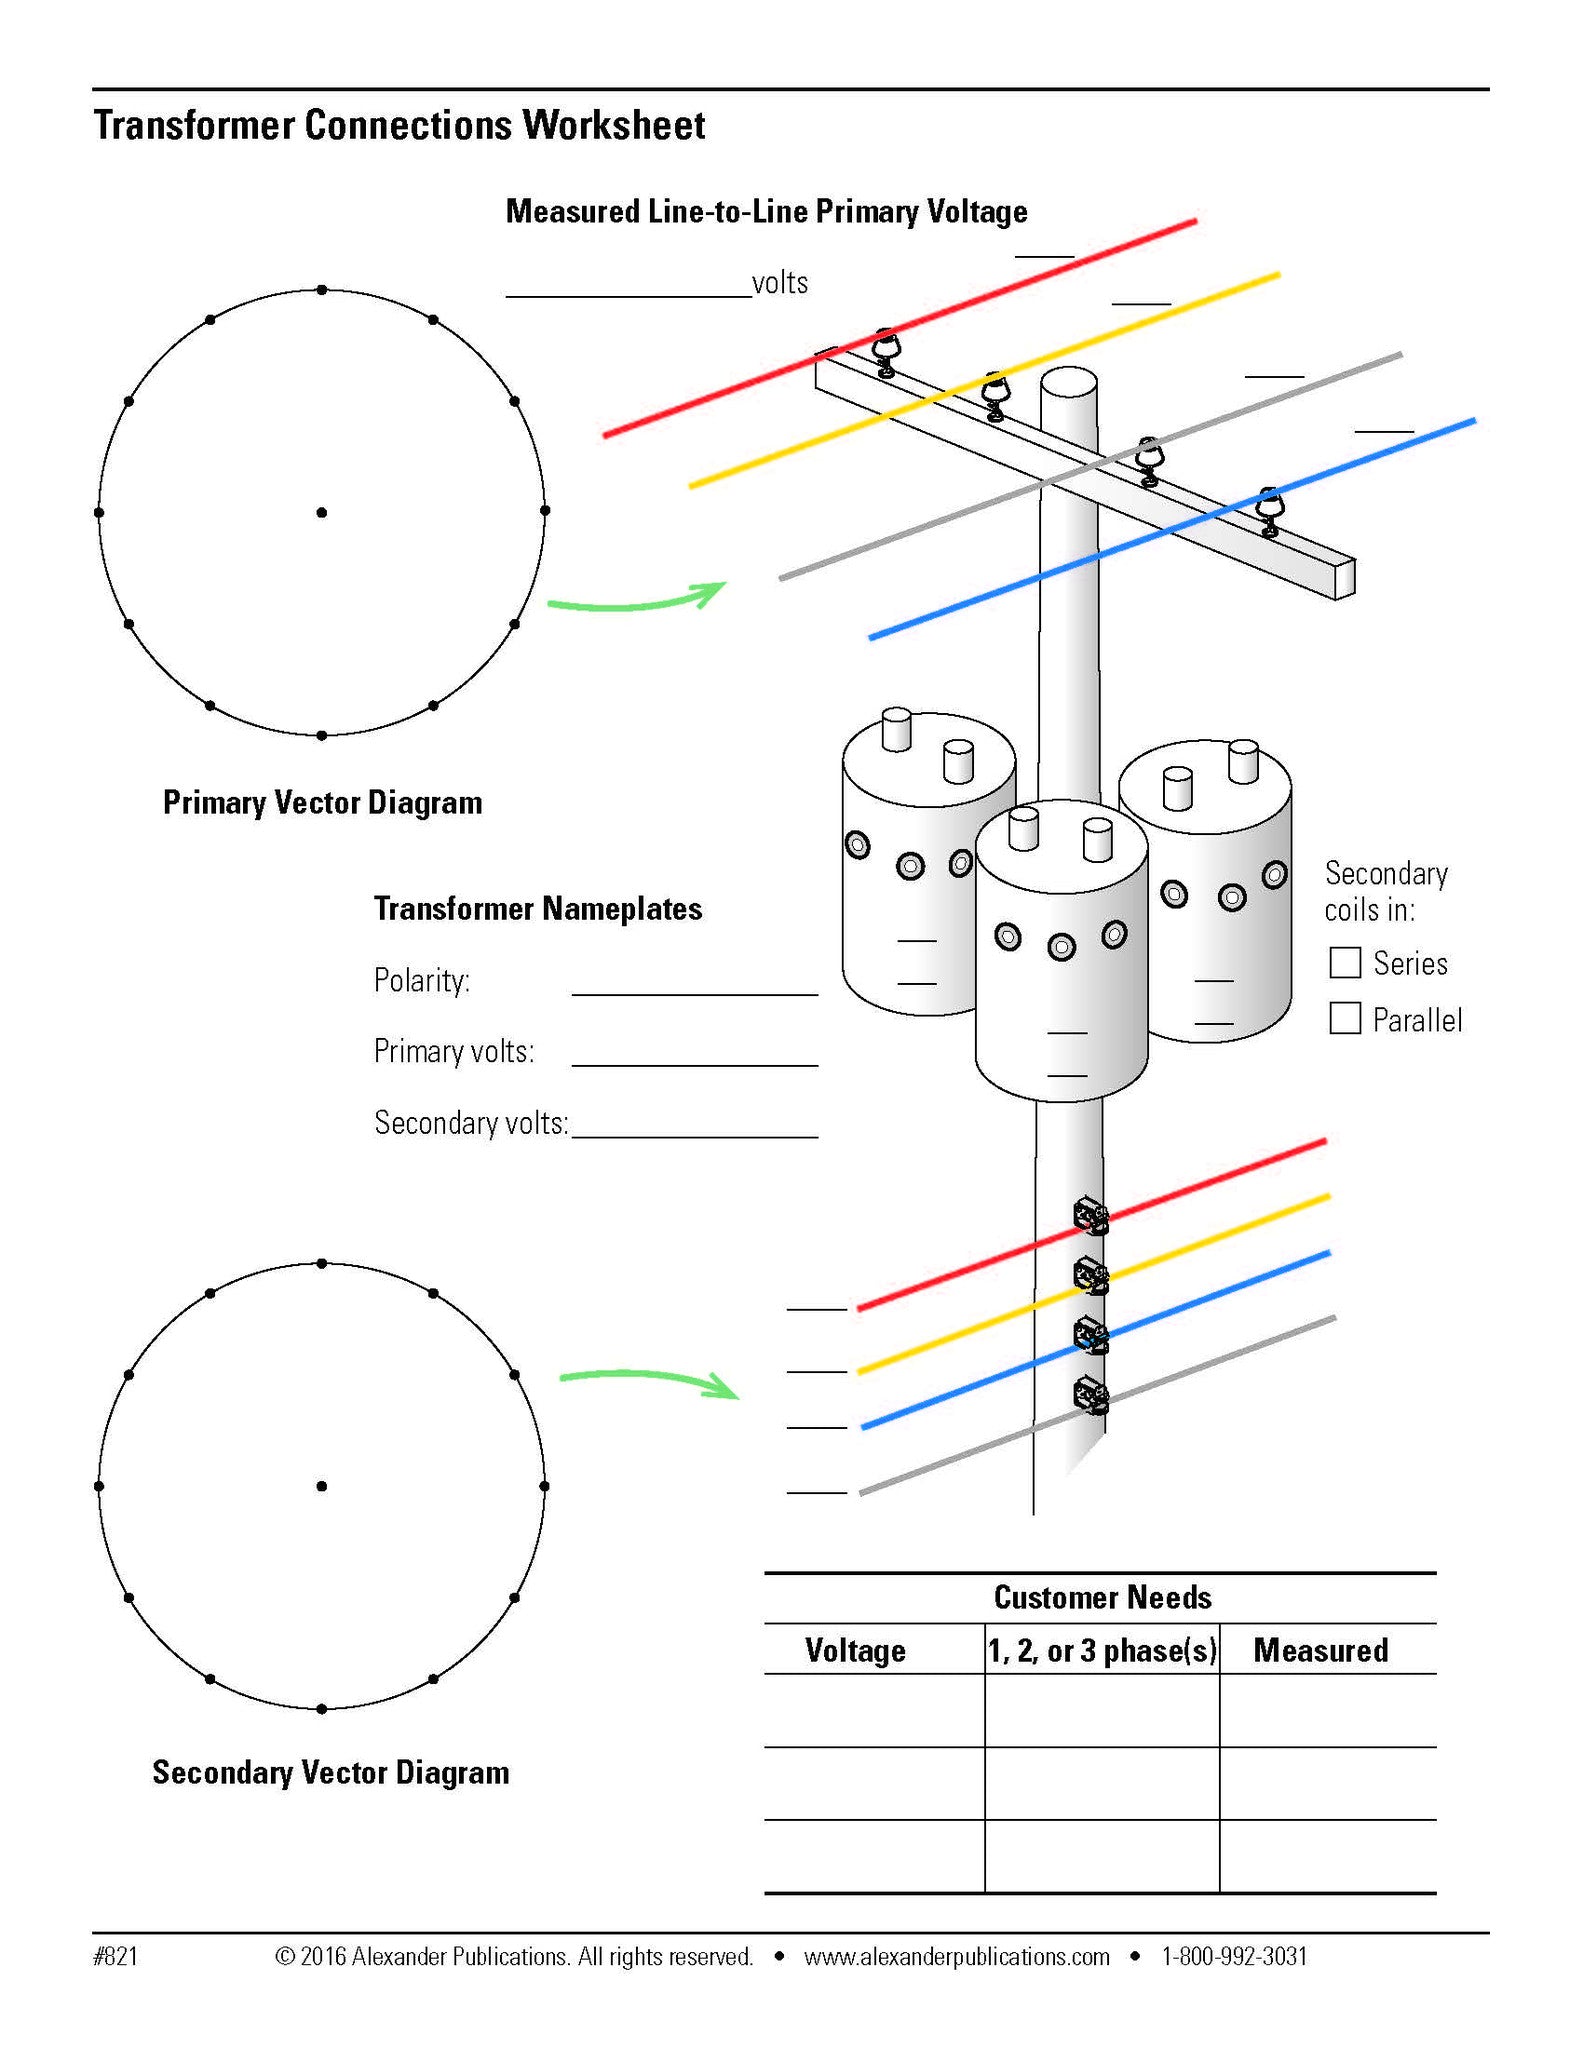 Transformer Connections Worksheets – Alexander Publications circuit diagram of series test lamp 